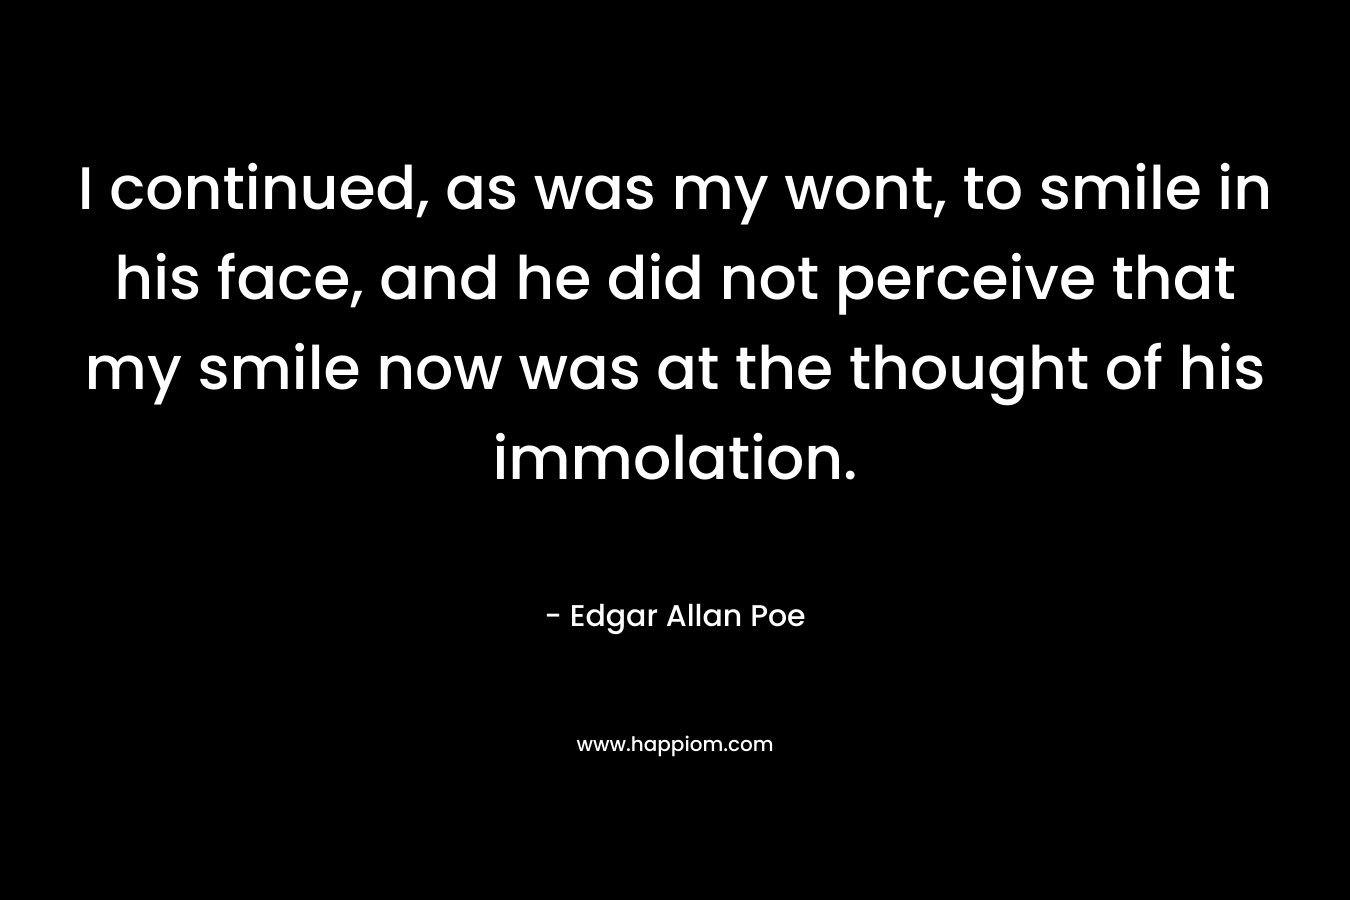 I continued, as was my wont, to smile in his face, and he did not perceive that my smile now was at the thought of his immolation. – Edgar Allan Poe